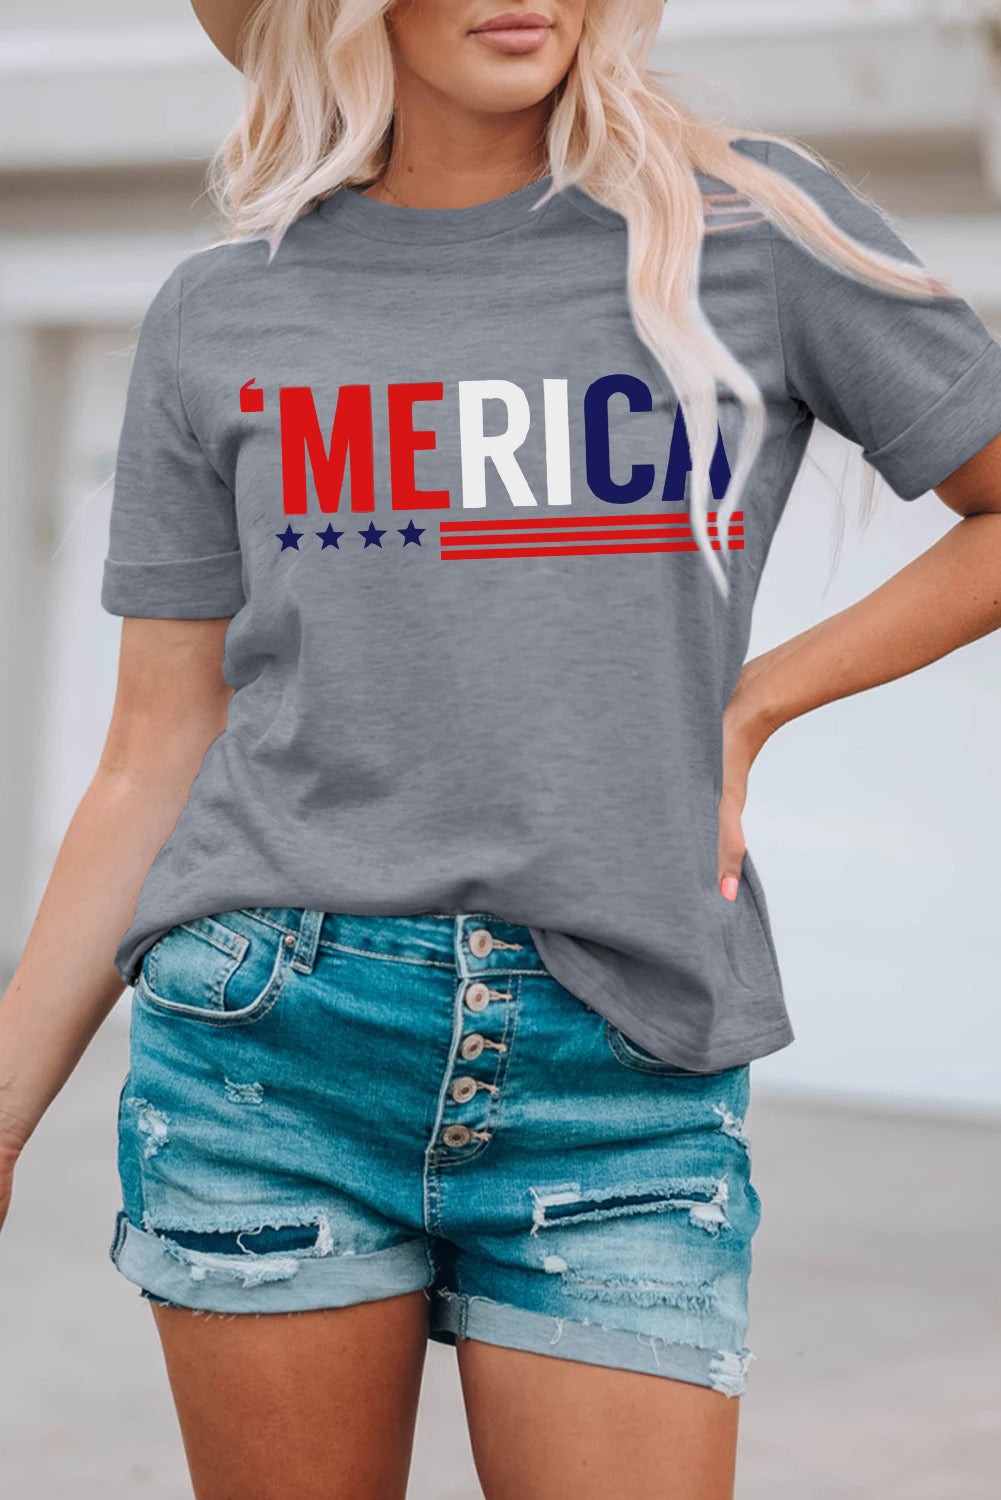 MERICA Letter Graphic American Crewneck Tee Shirt (Plus Size Available)